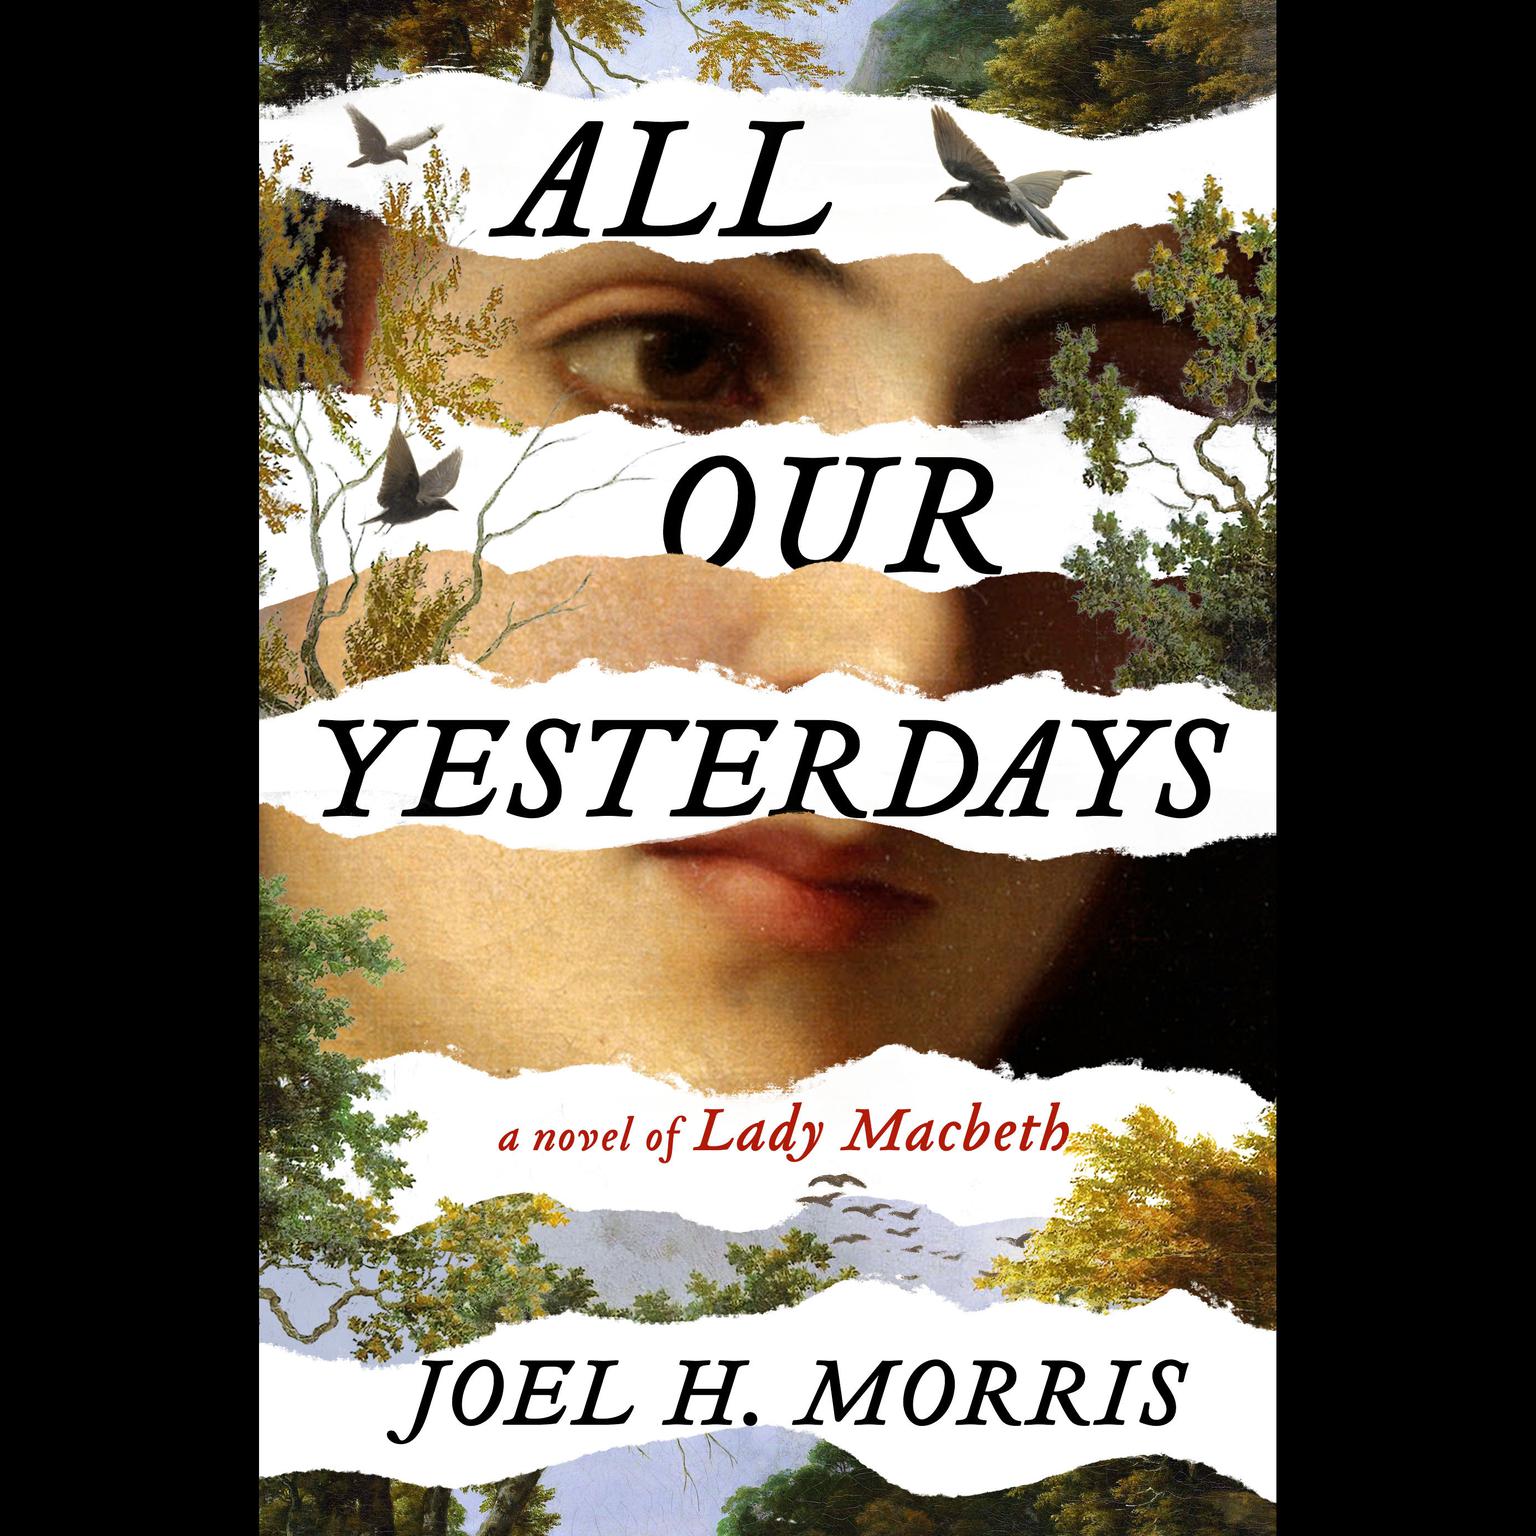 All Our Yesterdays: A Novel of Lady Macbeth Audiobook, by Joel H. Morris